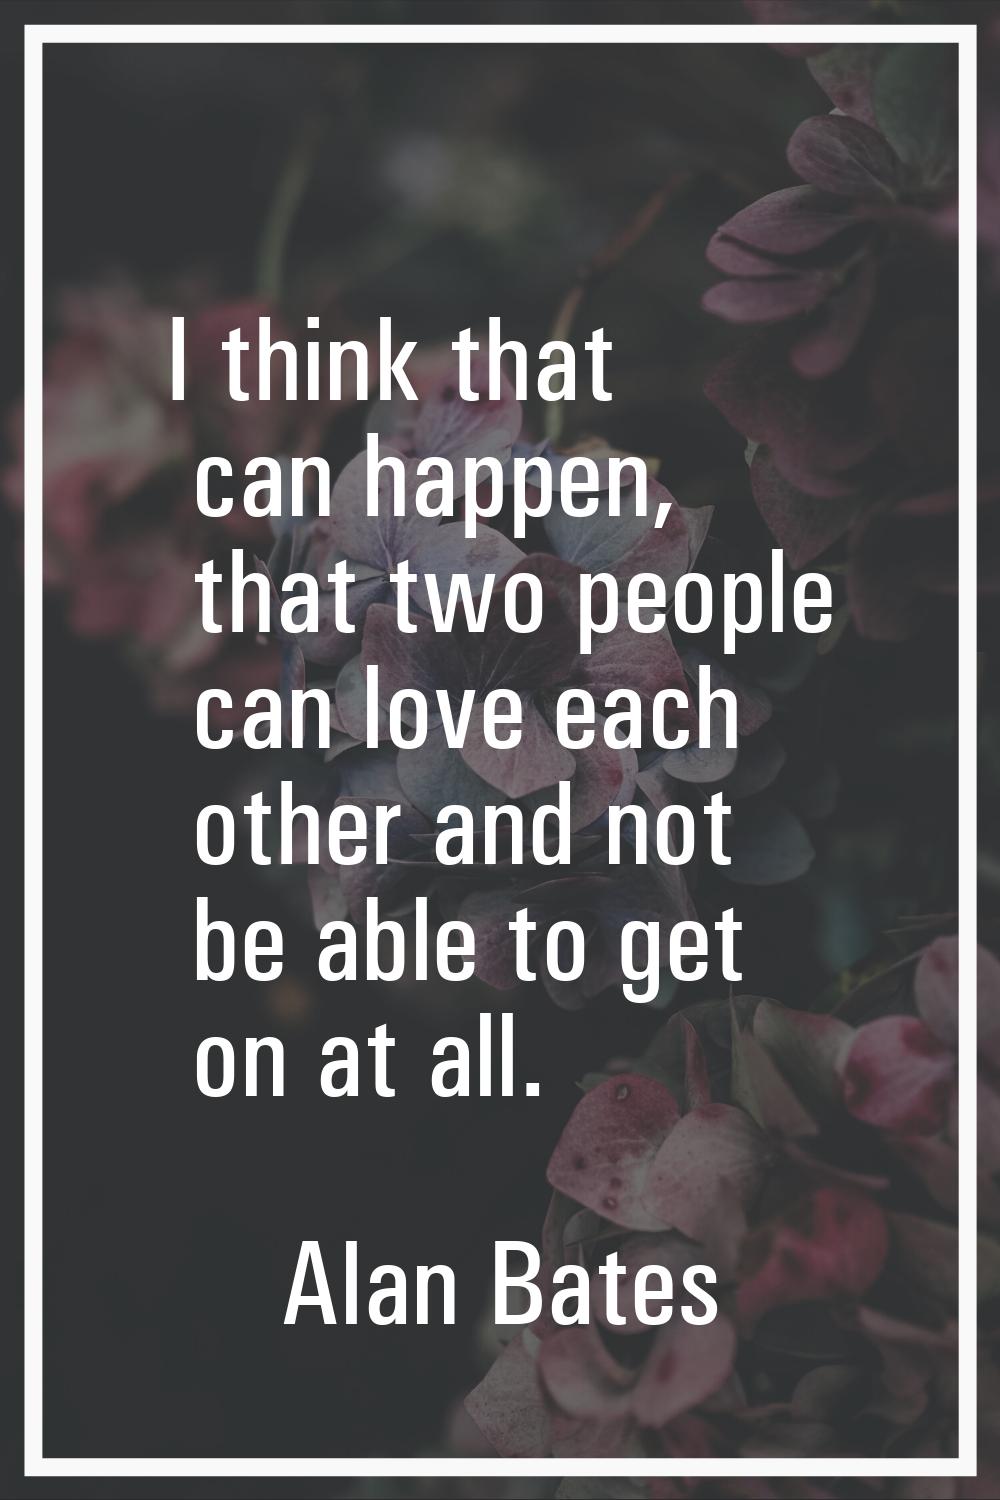 I think that can happen, that two people can love each other and not be able to get on at all.